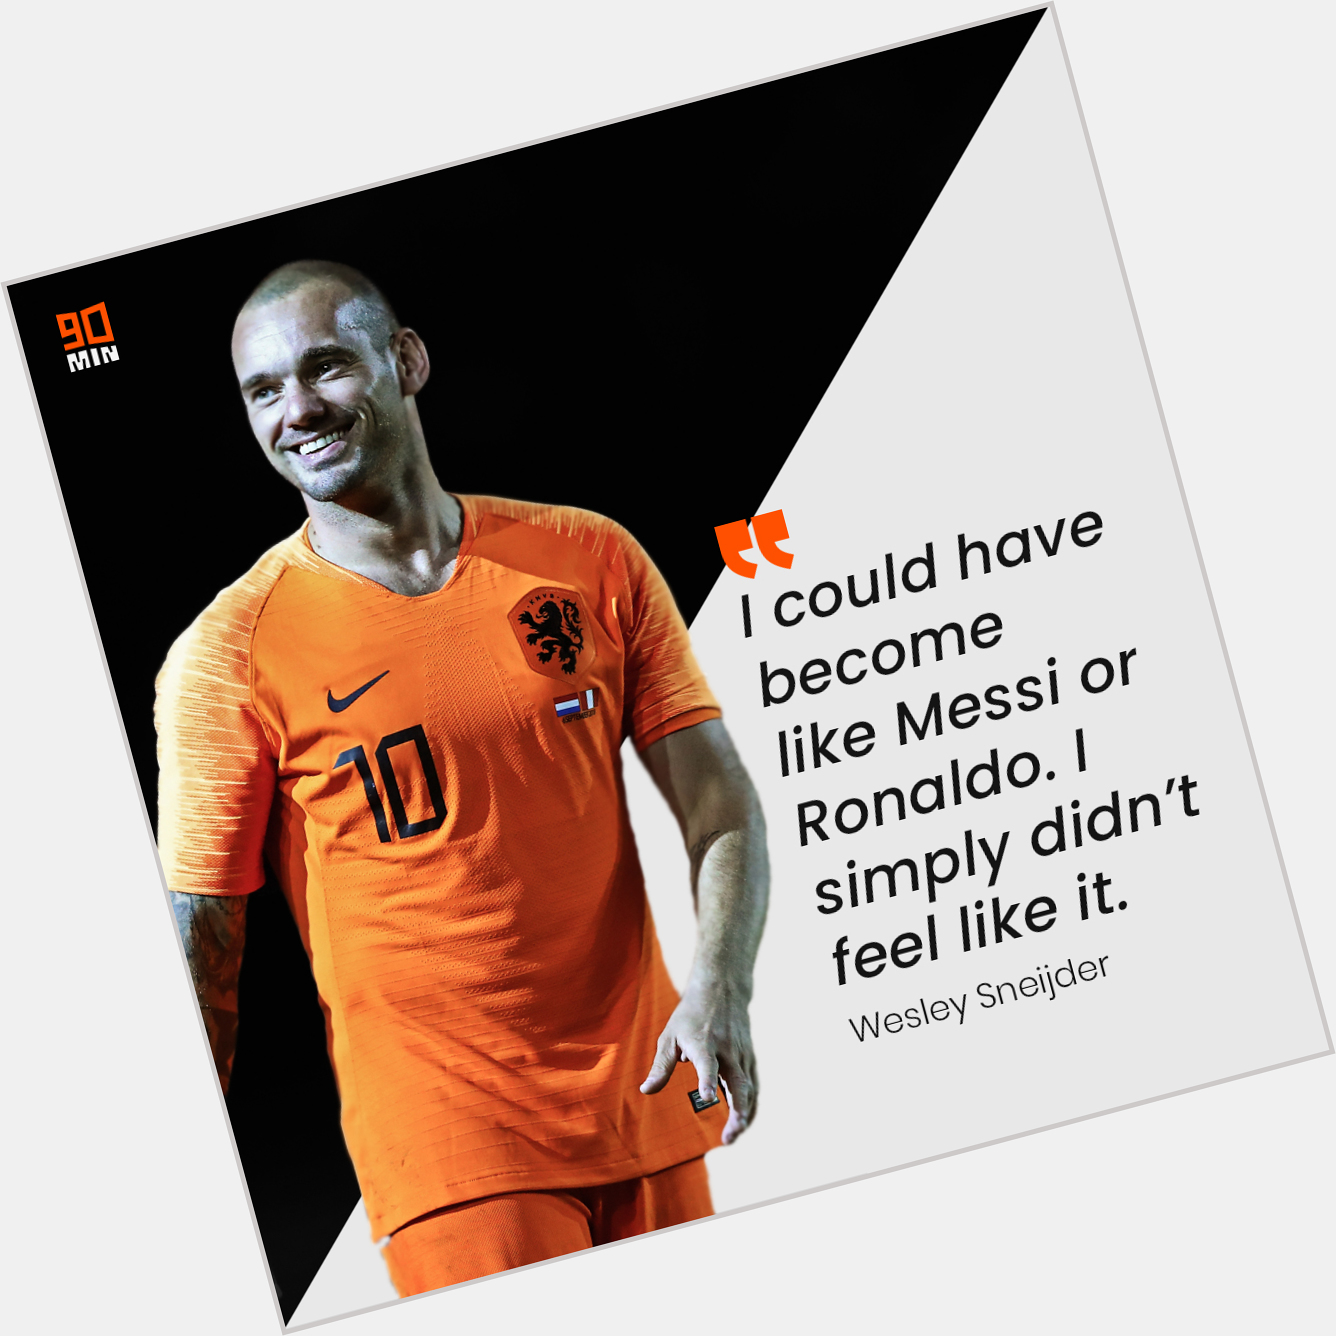 Happy birthday to Wesley Sneijder - The man who could\ve been even better, but enjoyed life! 